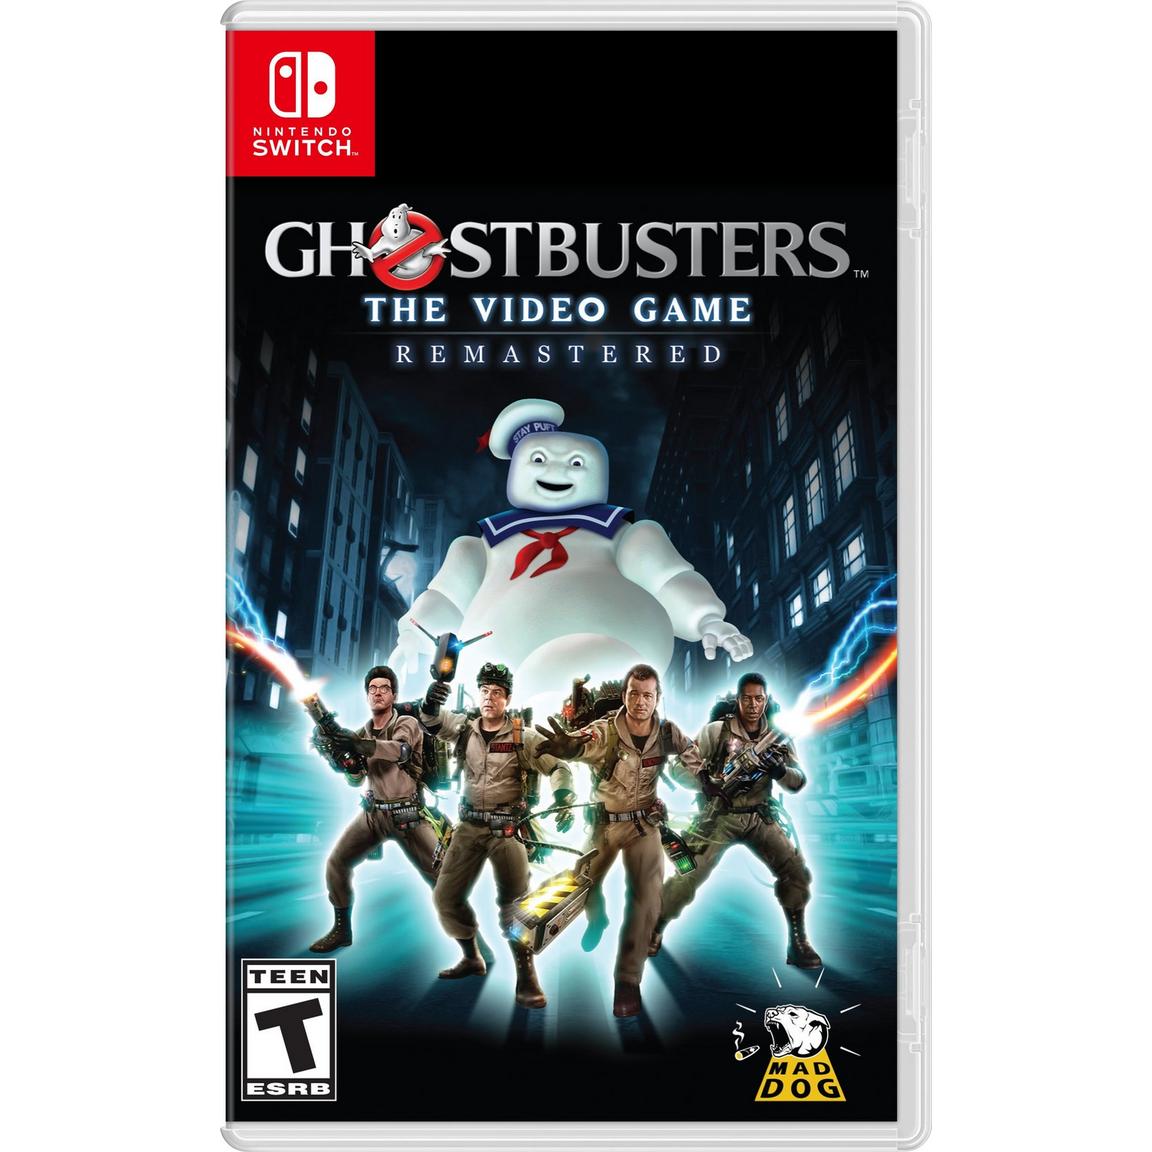 Ghostbusters: The Video Game Remastered GameStop Exclusive - Nintendo Switch